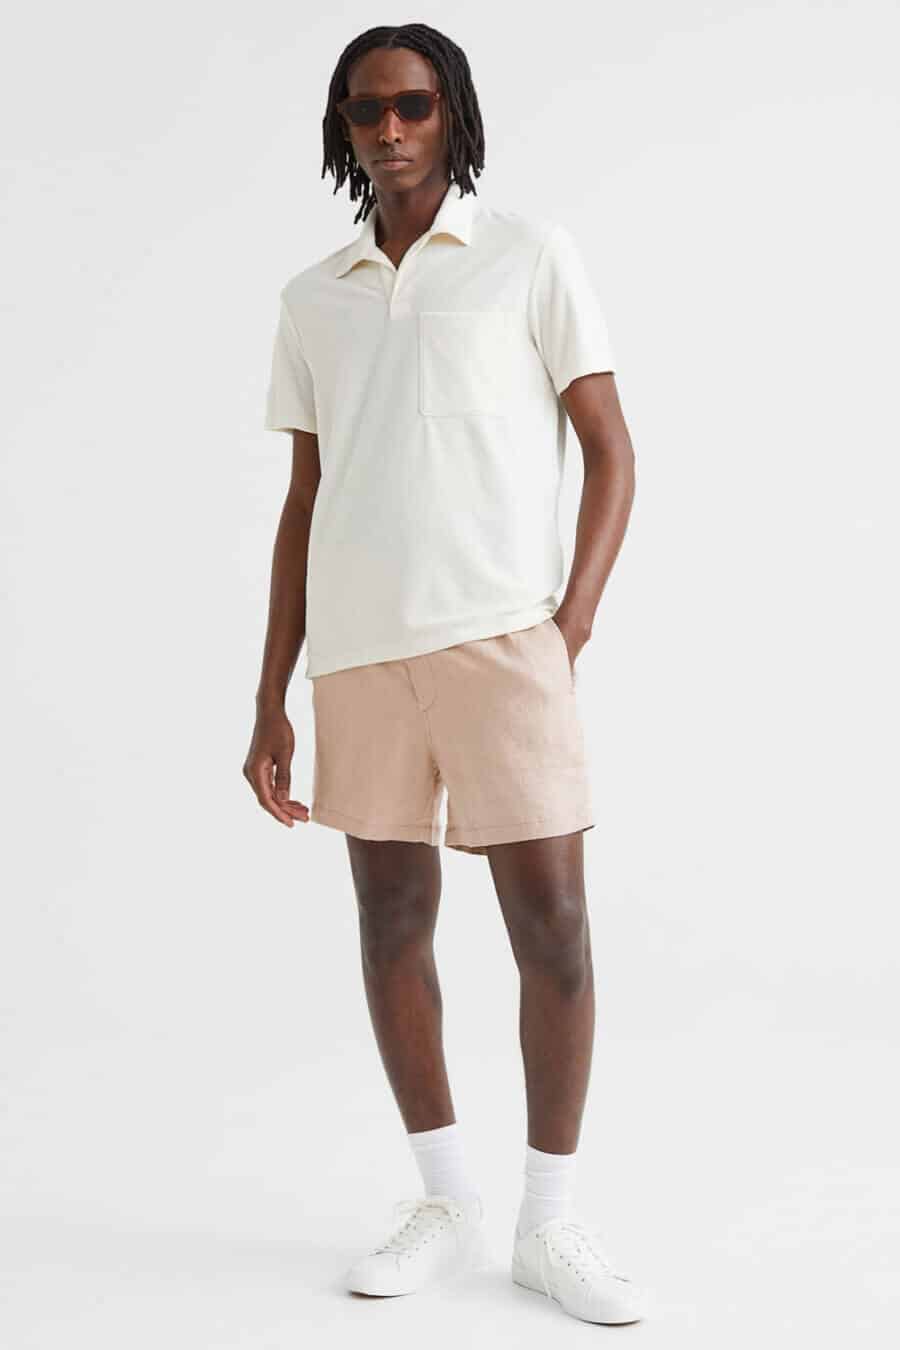 Men's pink linen shorts with white polo shirt and sneakers outfit